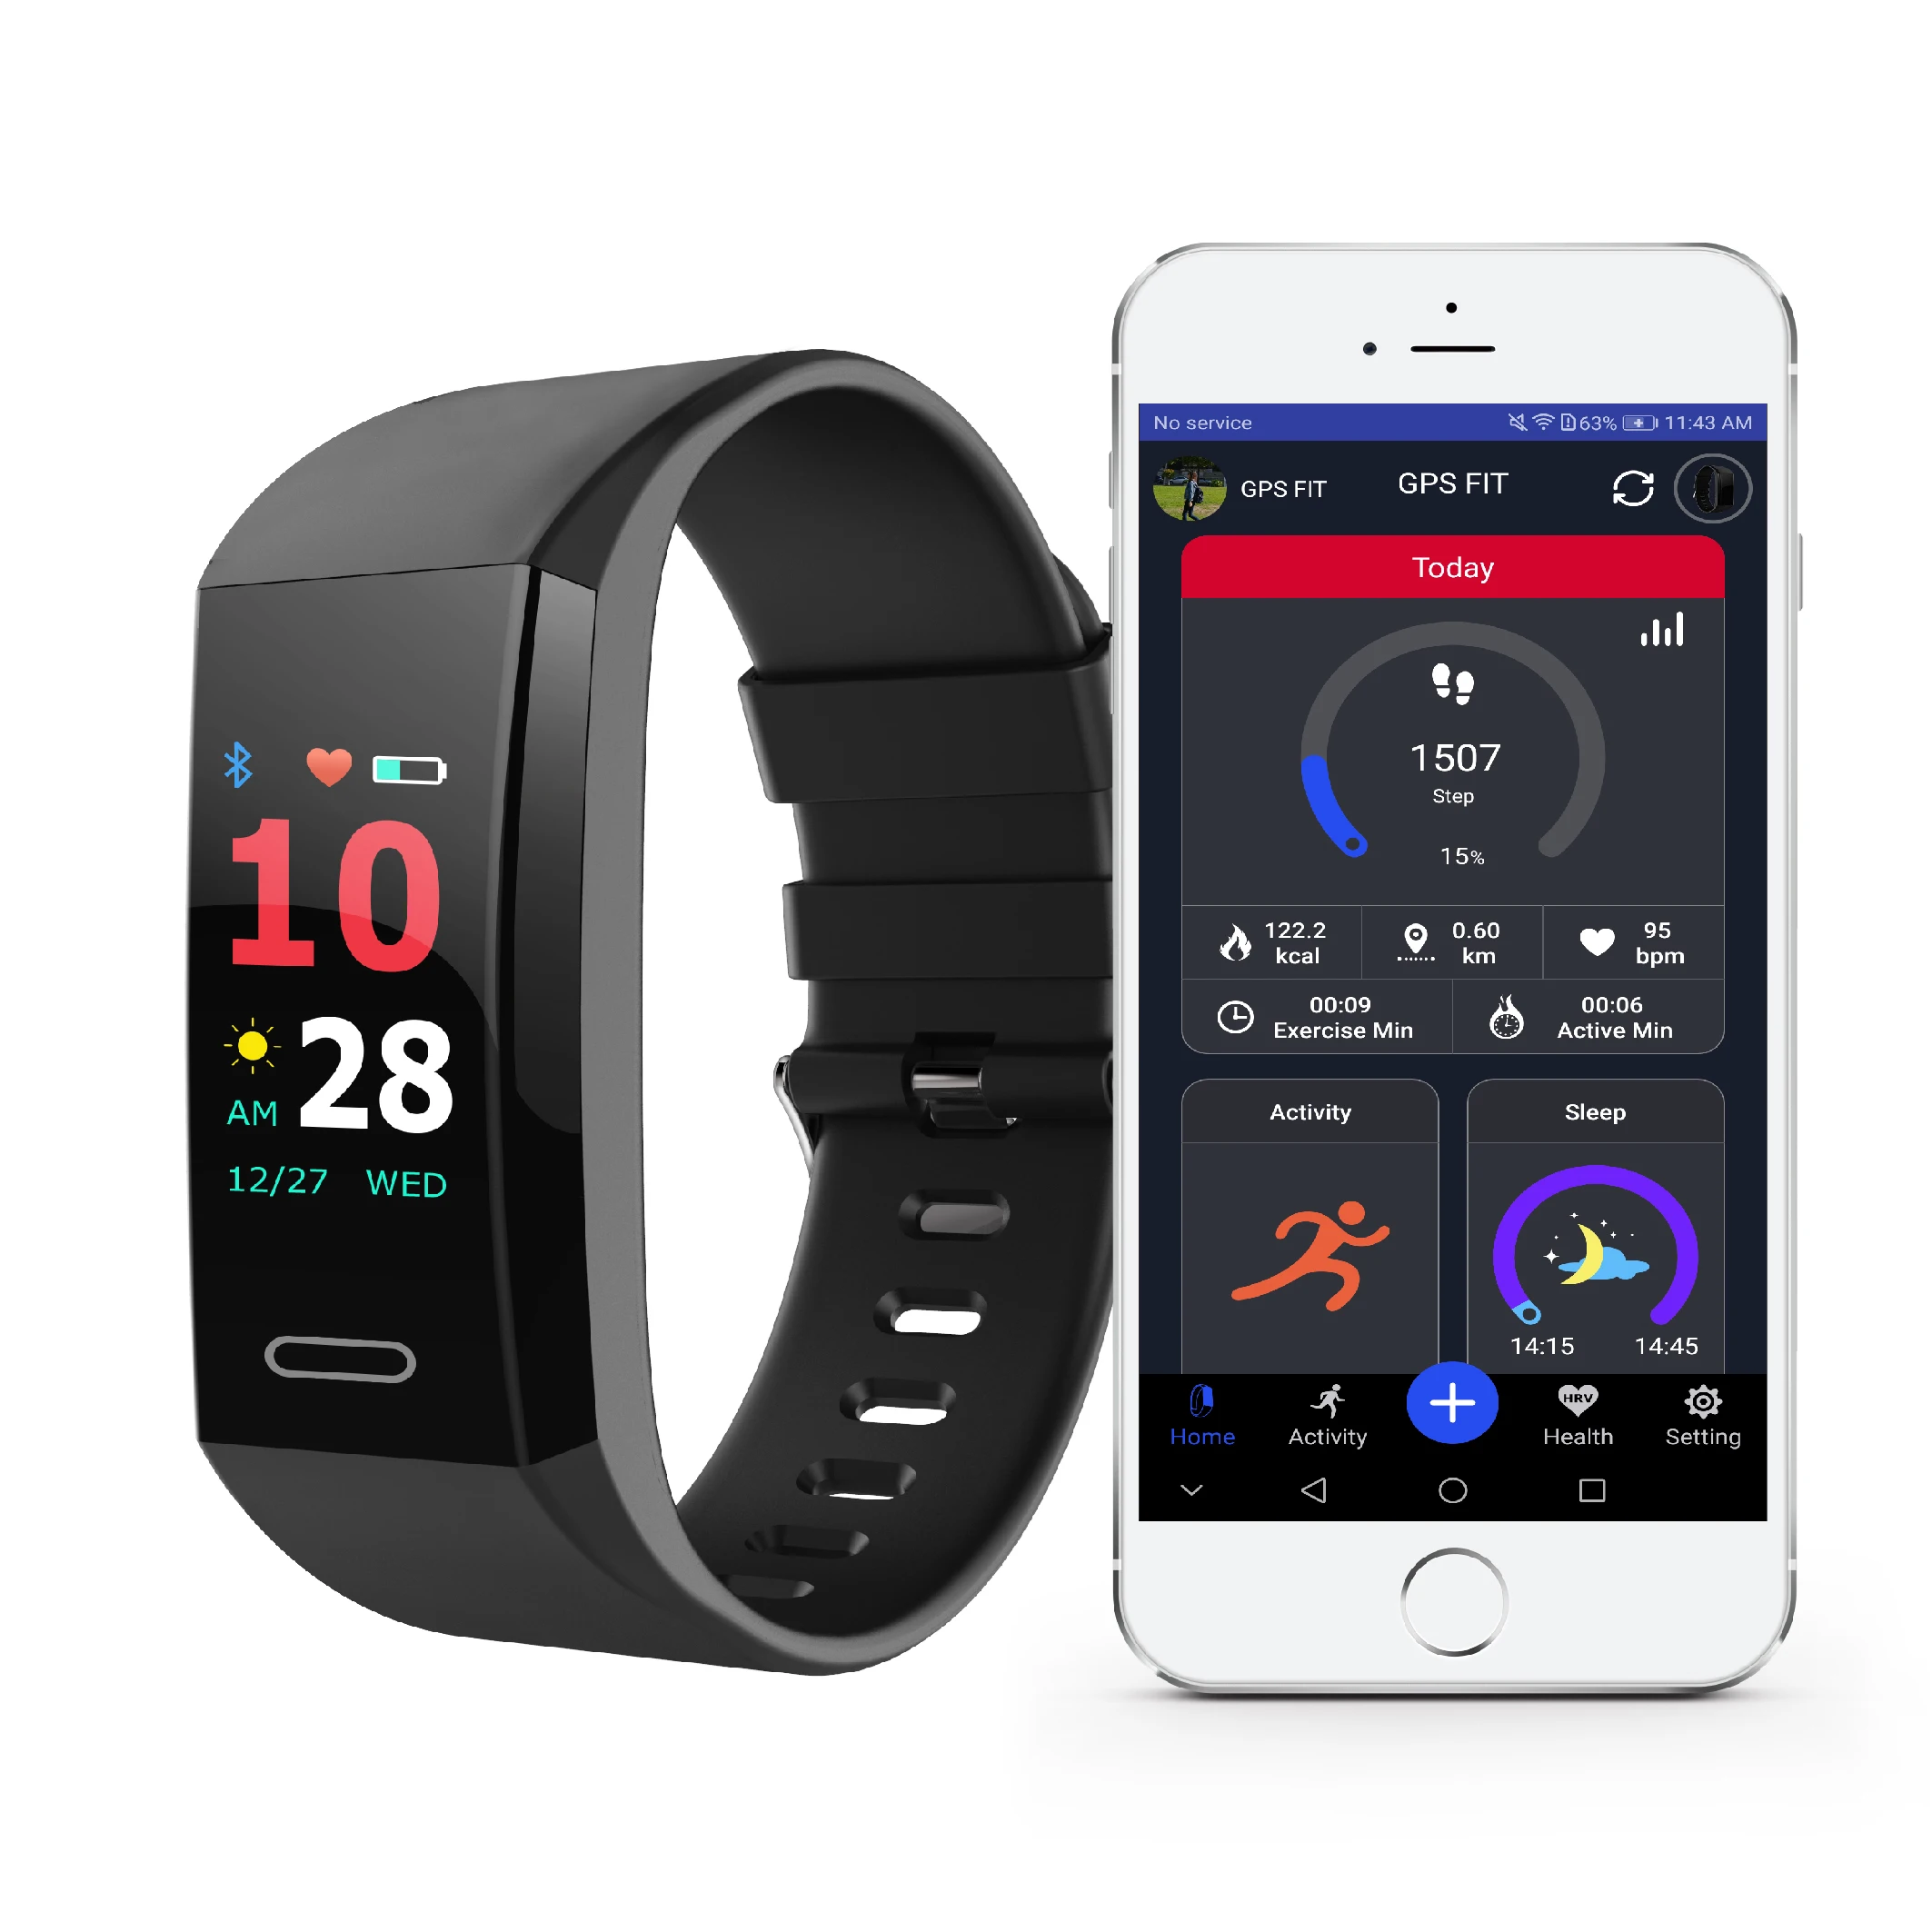 

J-Style New Innovation GPS Heart Rate HRV BP Stress Monitoring Fitness Tracker Watch with Built-in USB Charger IP67 Waterproof, Black, red, slate, or oem color